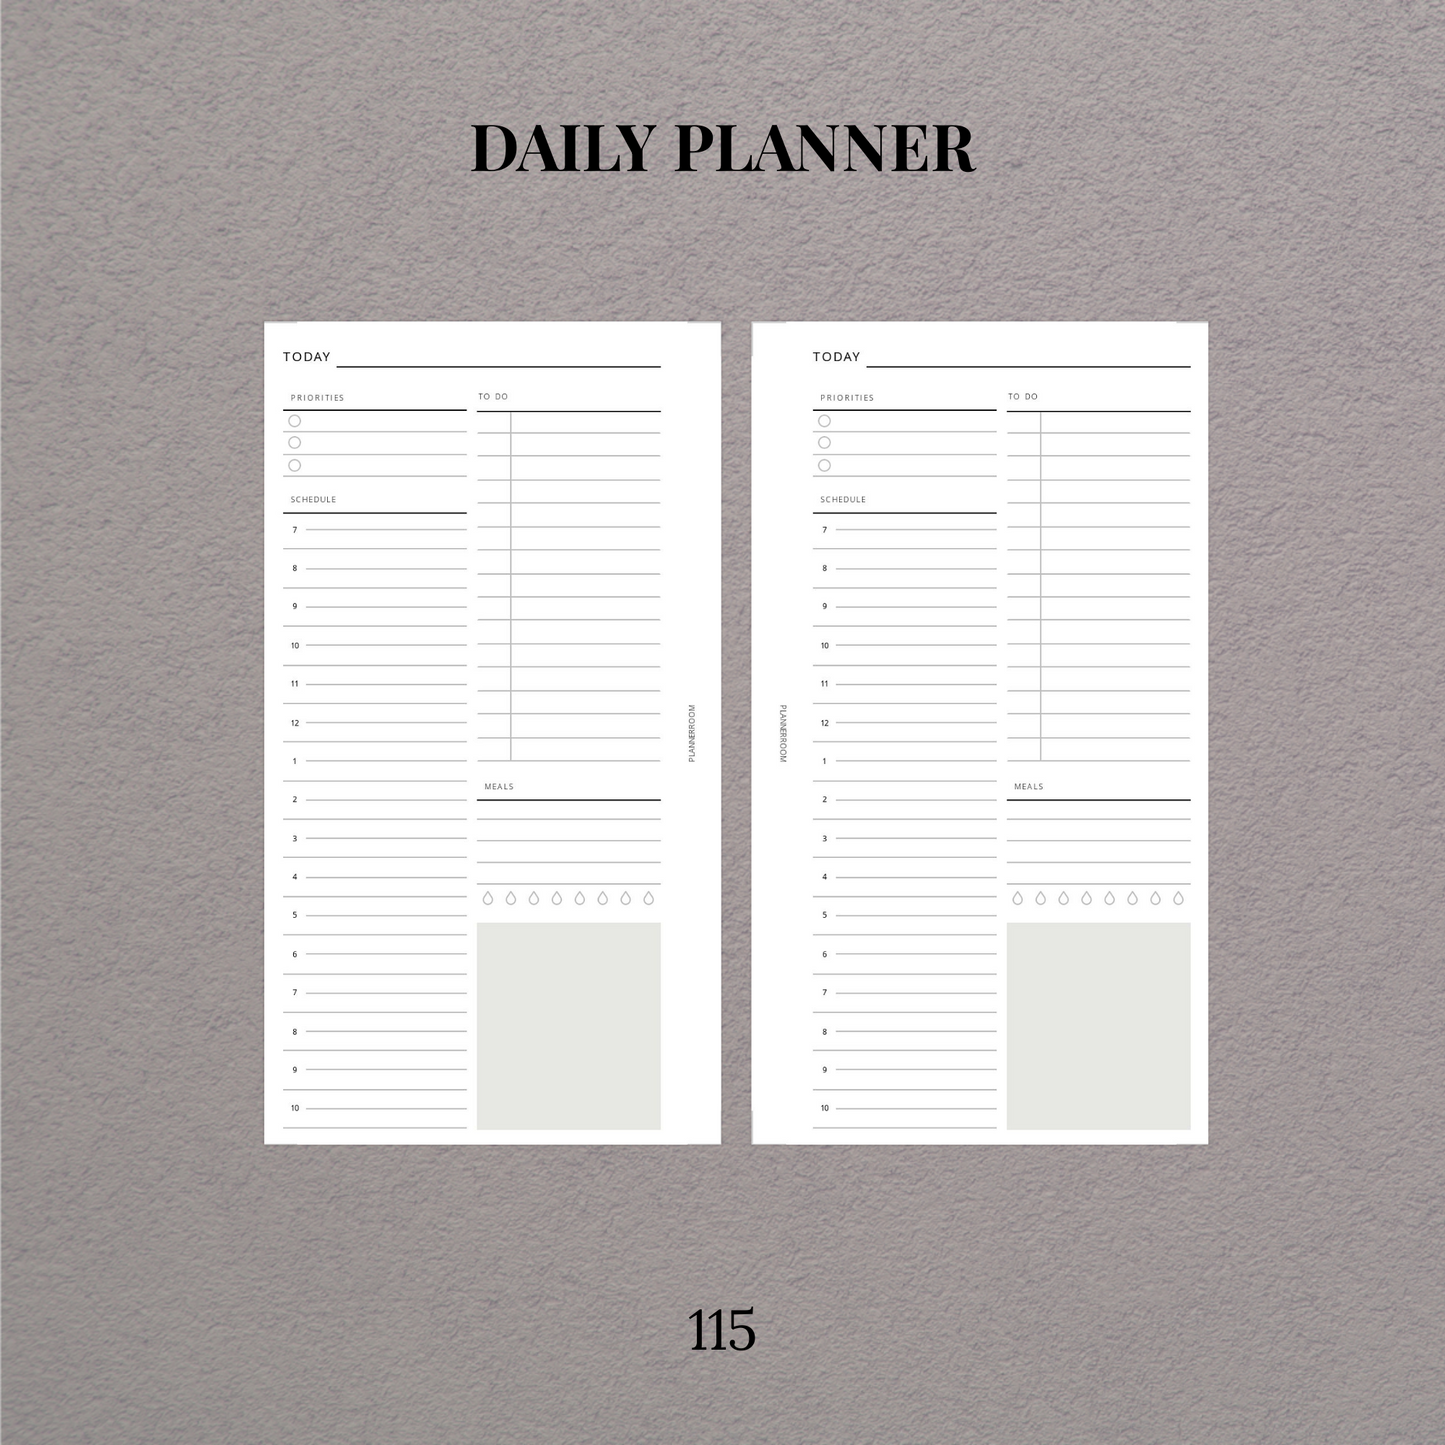 Daily planner - 115